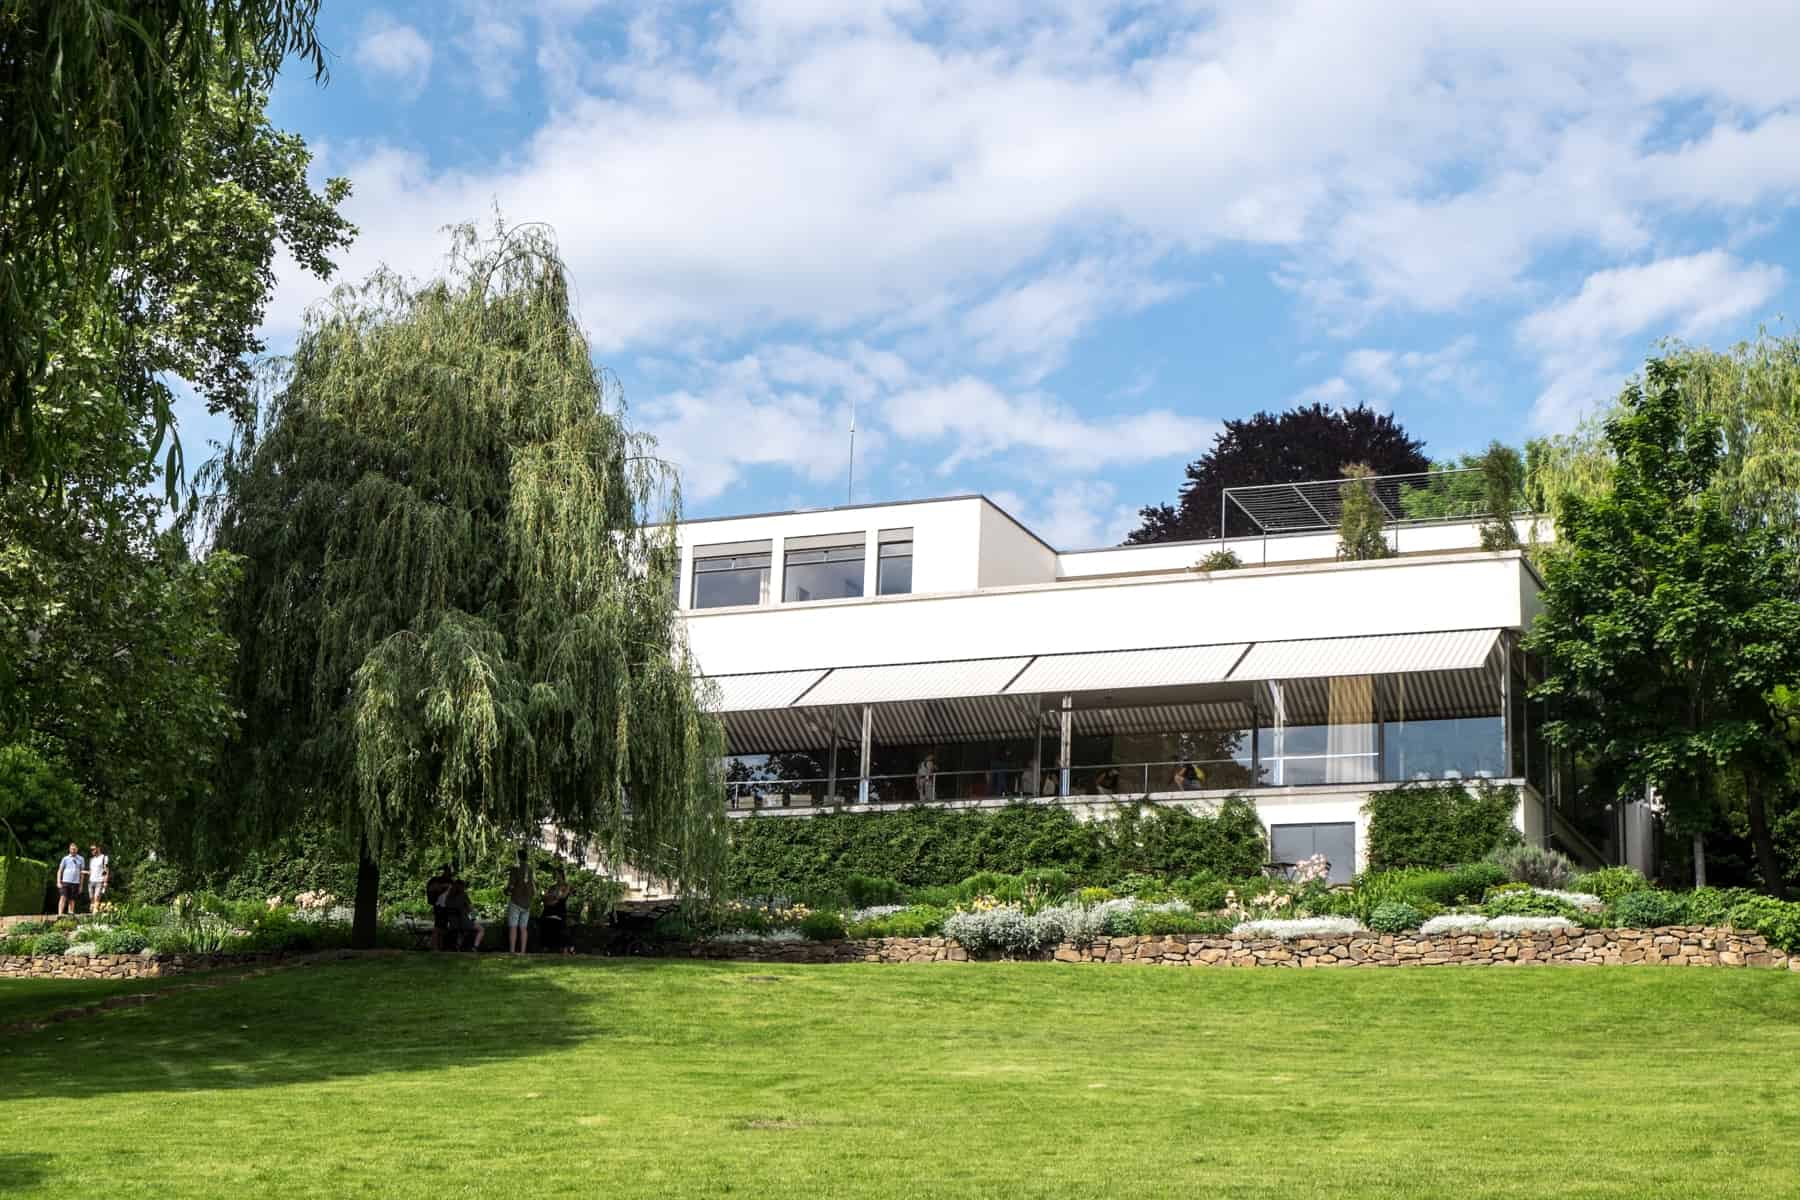 The long, white, functionalist style Villa Tugendhat in Brno - a Czech Republic UNESCO site. 